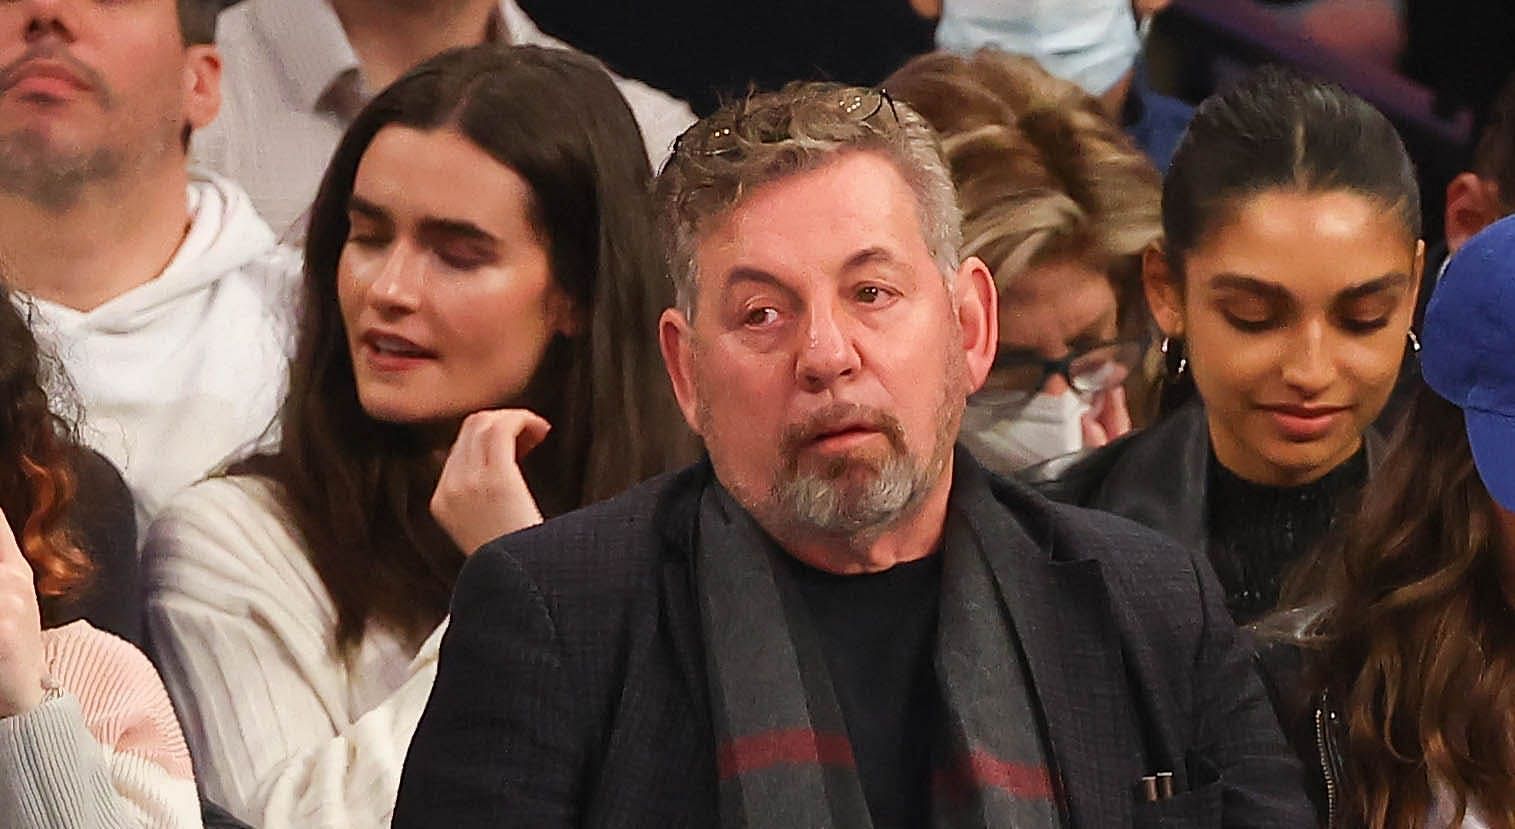 New York Knicks owner James Dolan says he does not like owning sports teams.